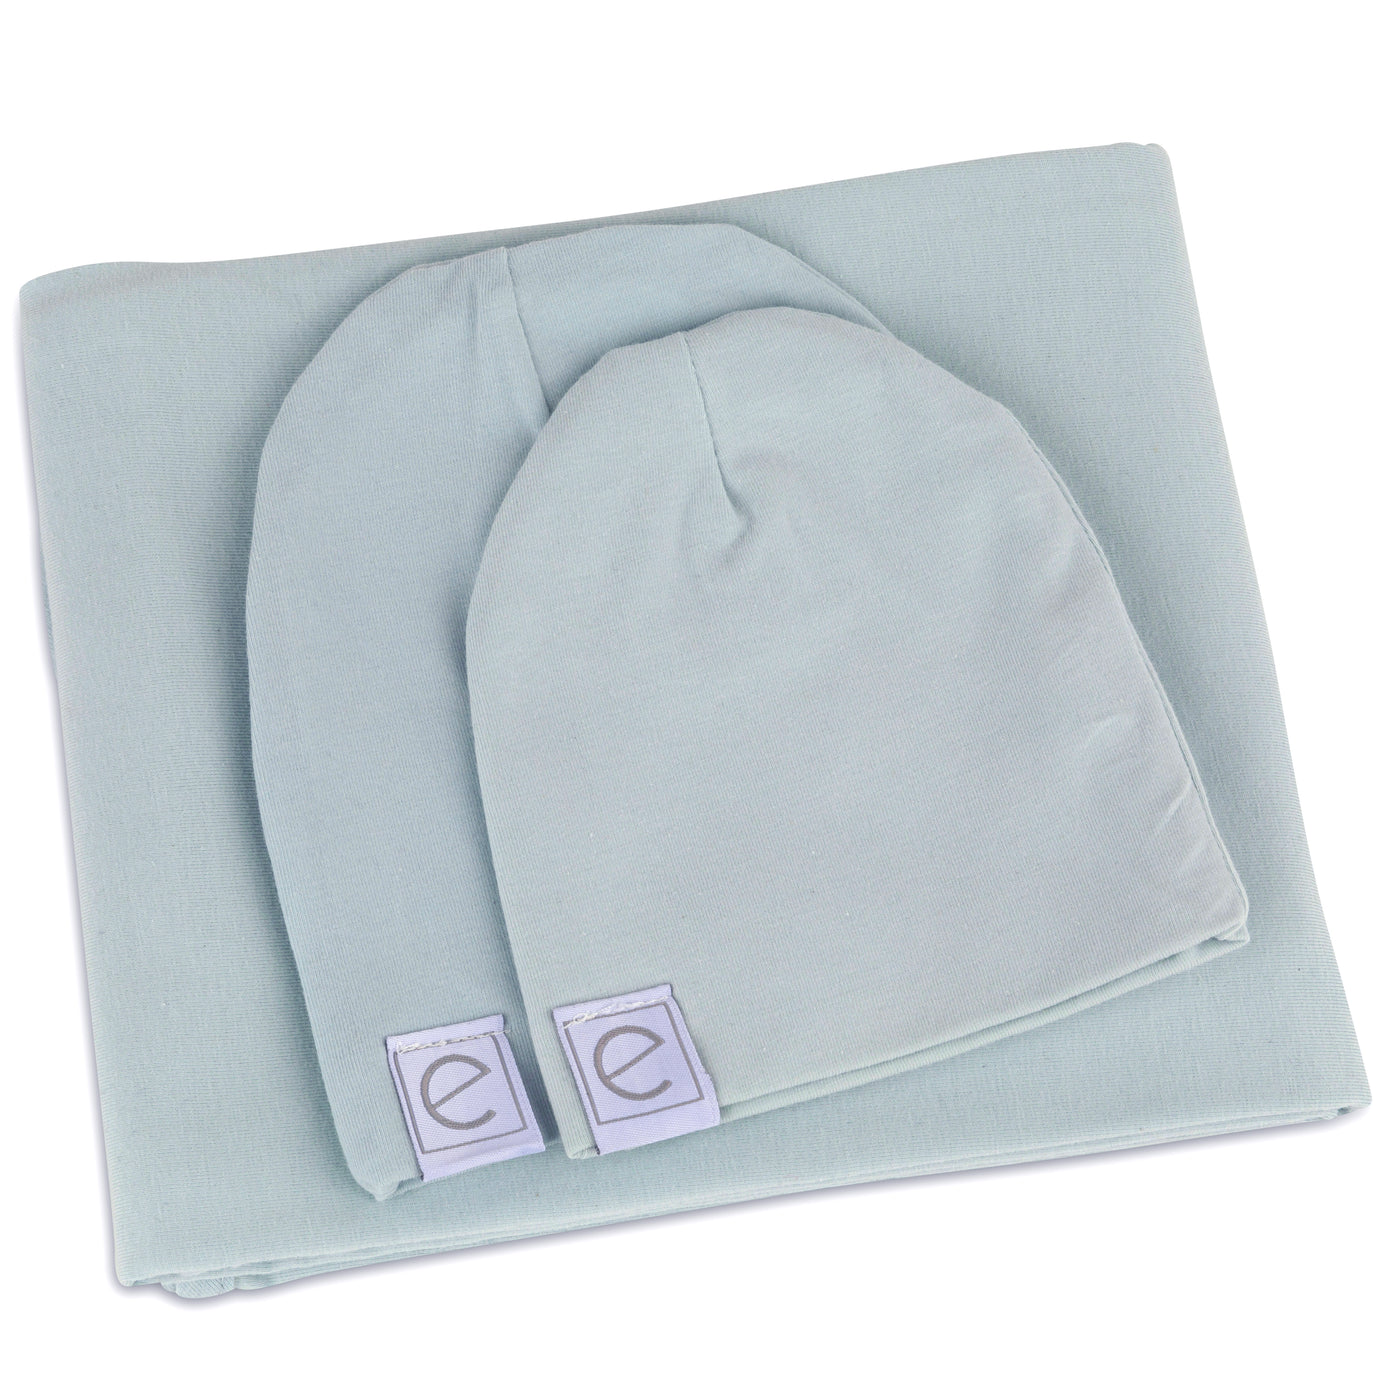 Ely's & Co. Receiving Blanket with Two Beanies - Misty Blue